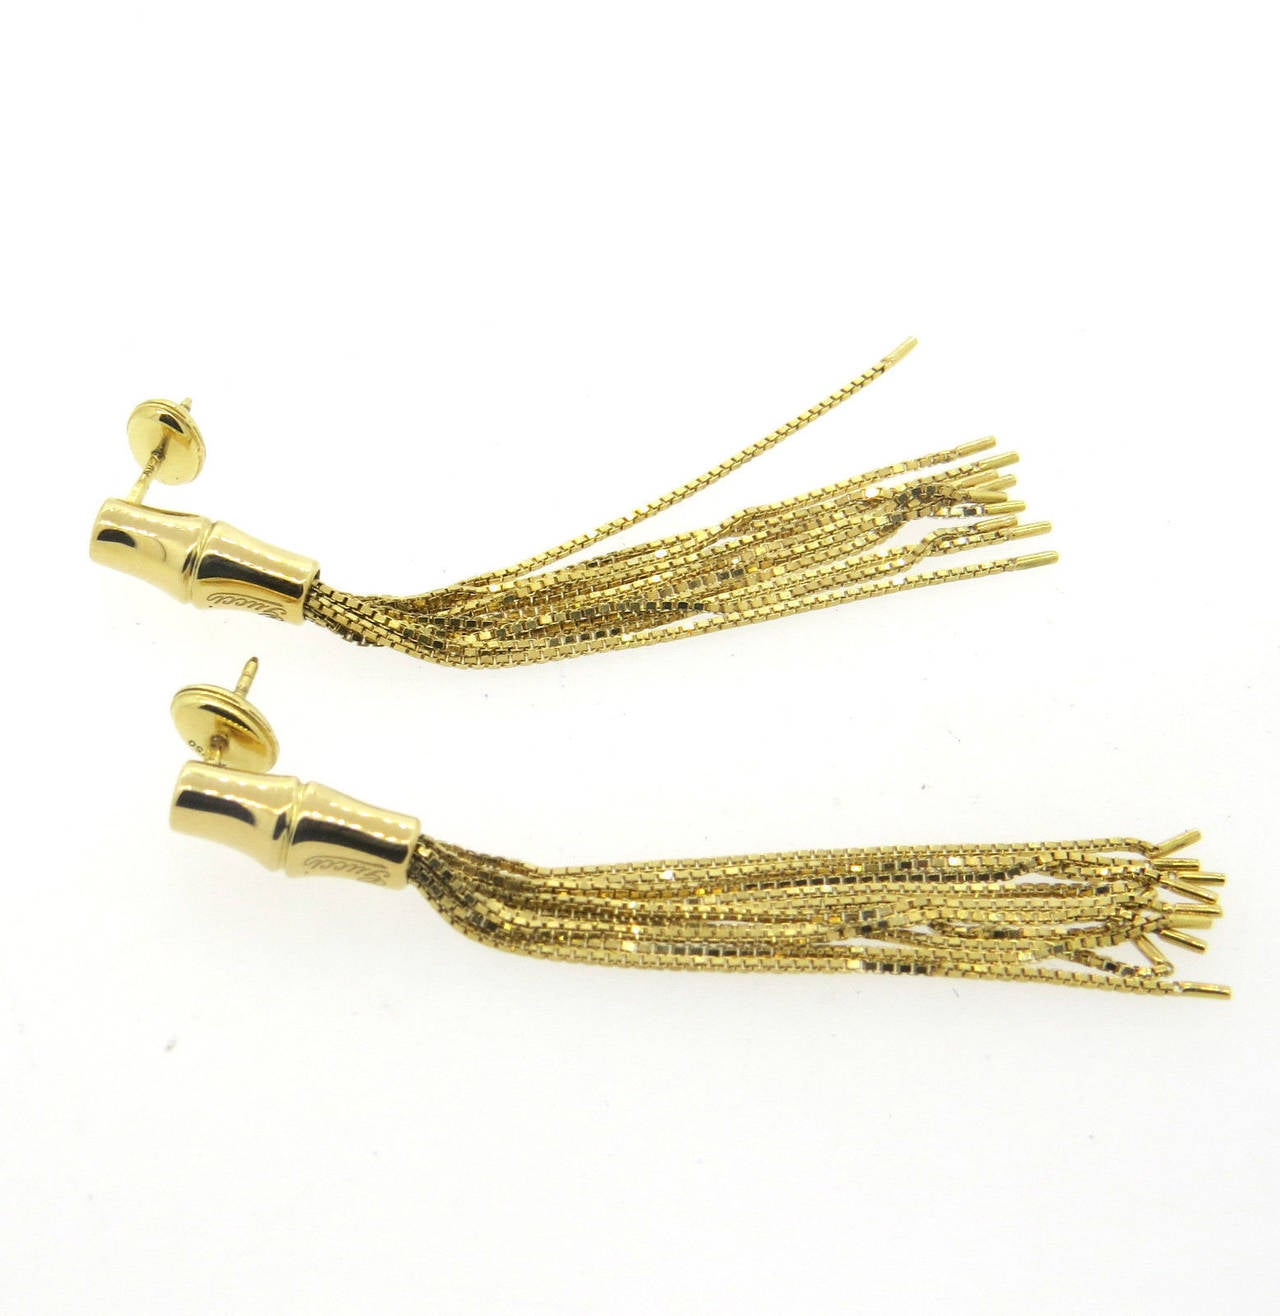 Long 18k gold tassel earrings, crafted by Gucci for Bamboo collection. Earrings are 65mm long x 6.2mm at widest points. Weight - 9.6 grams
Retail for $2990